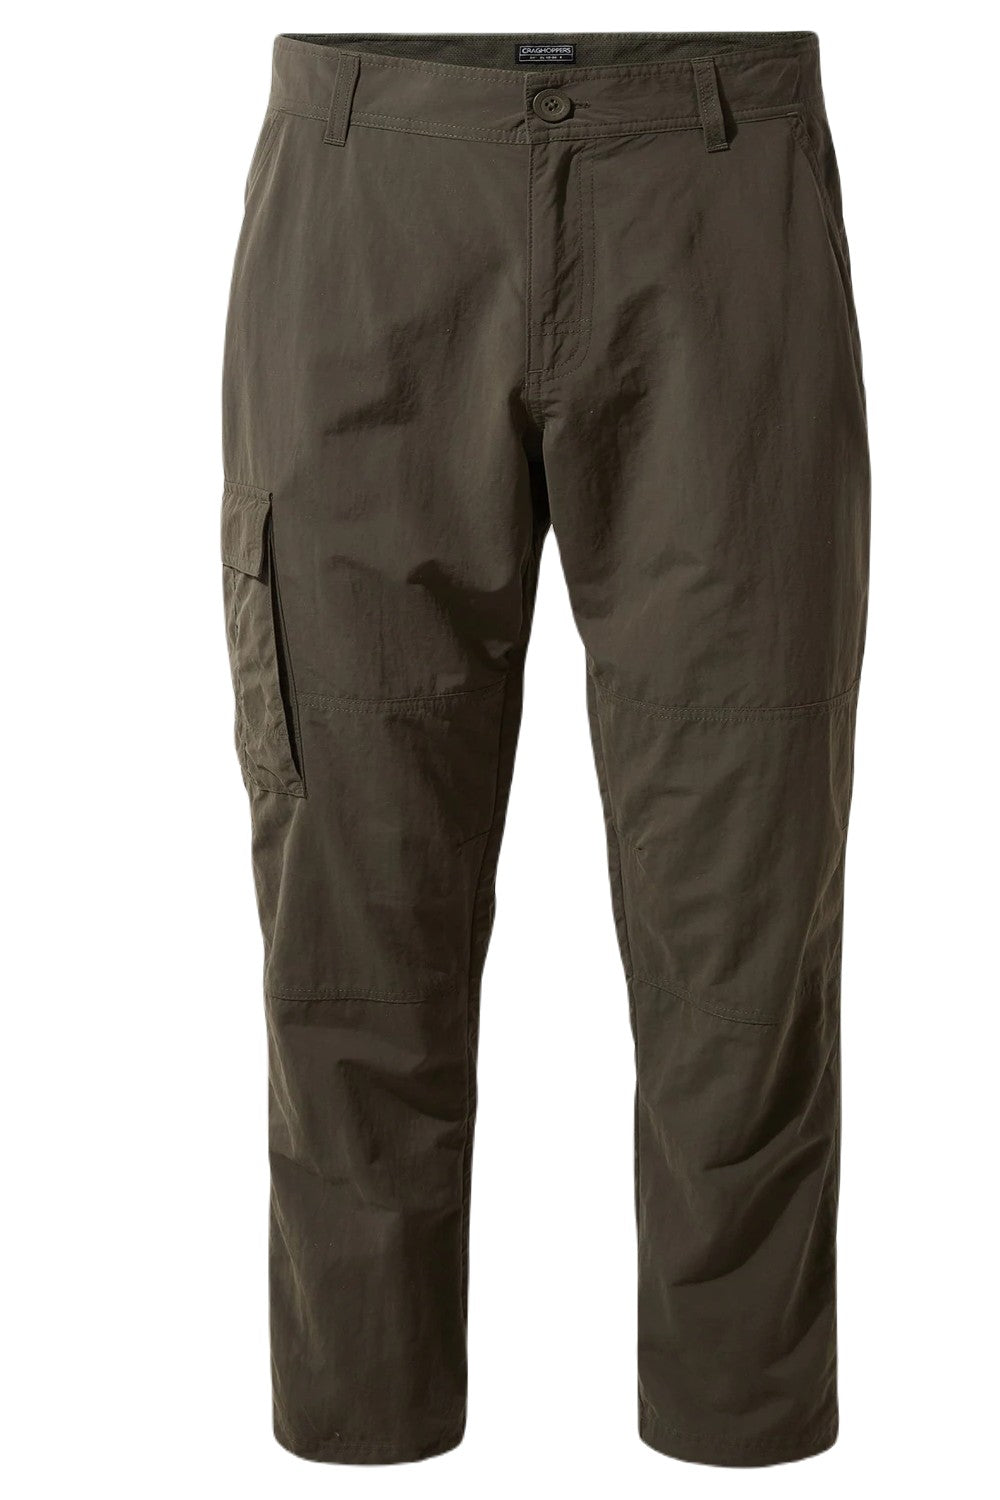 Craghoppers NosiLife Branco Trousers in Woodland Green